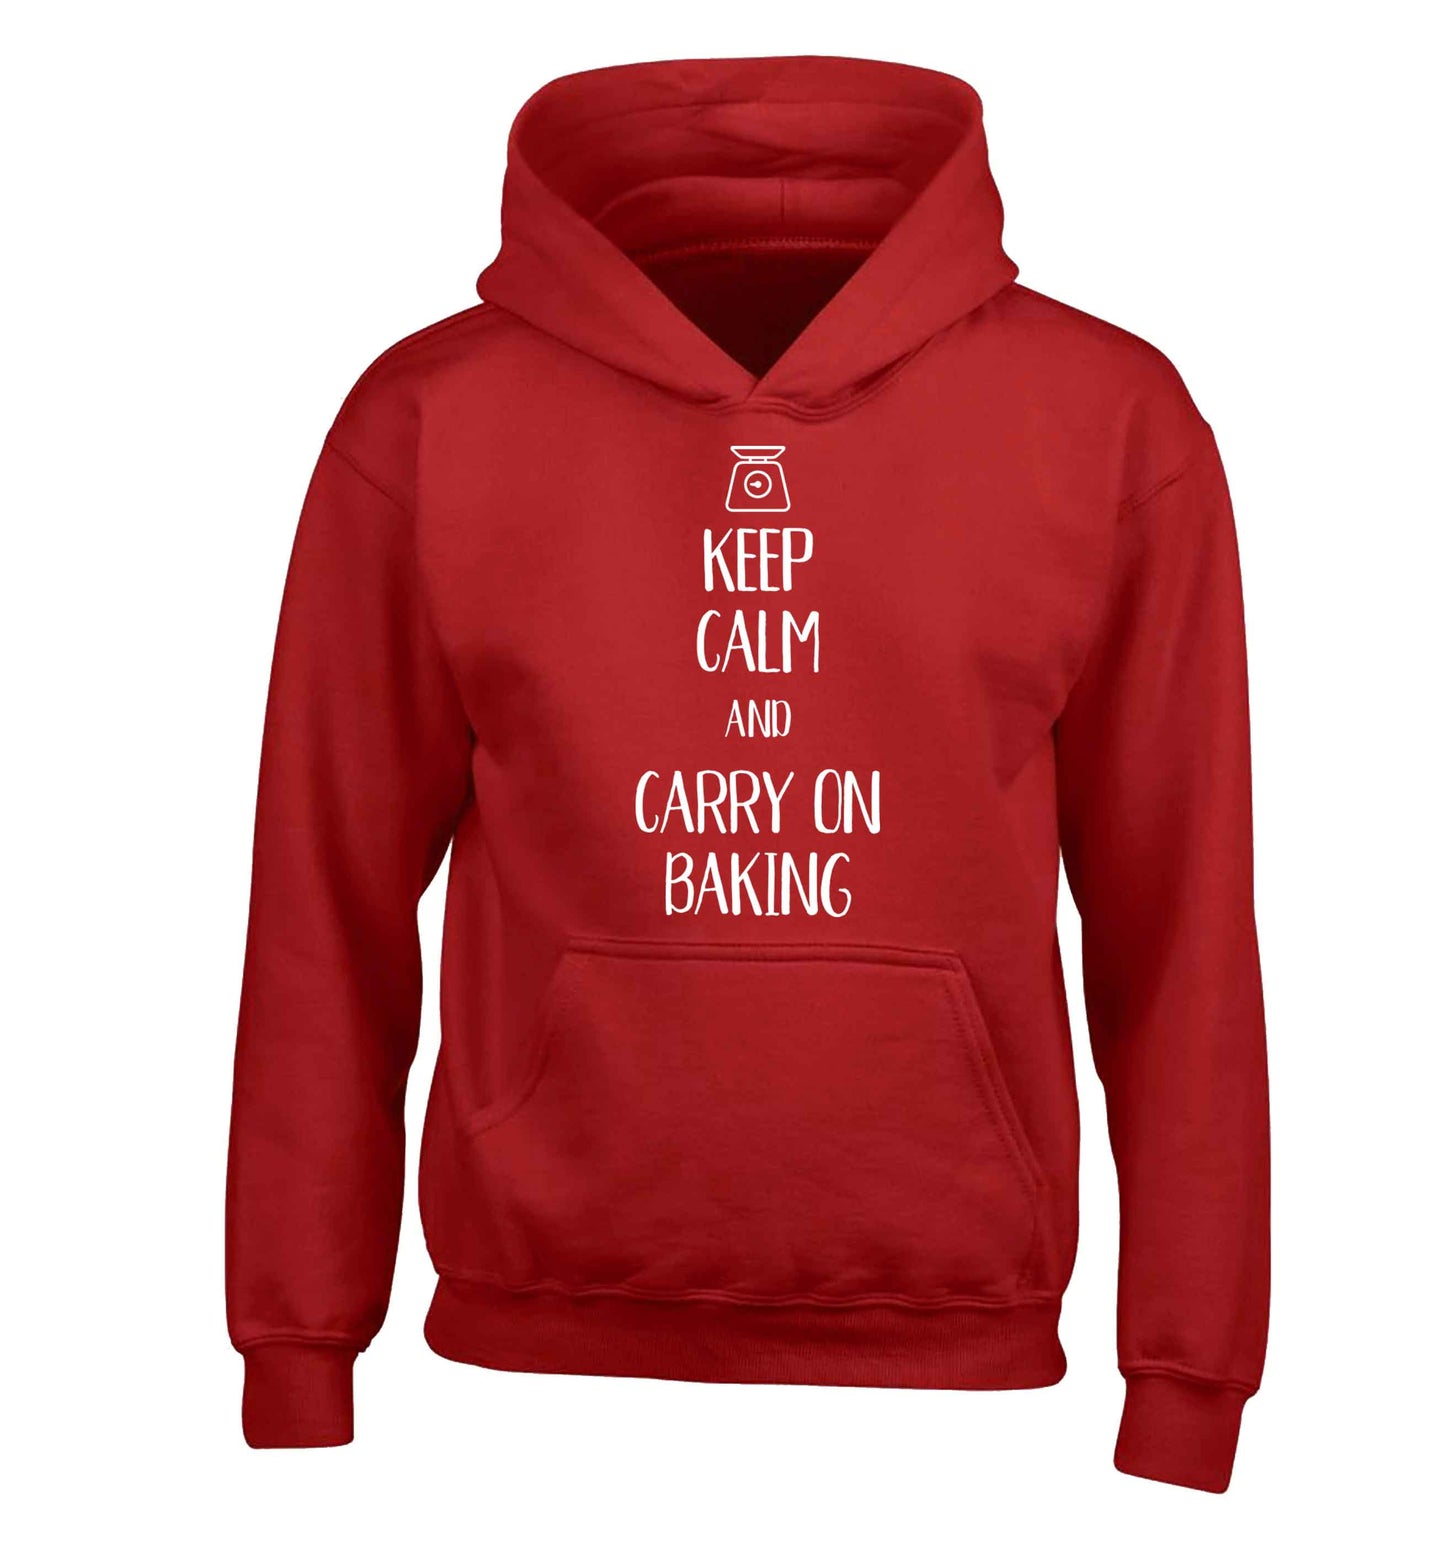 Keep calm and carry on baking children's red hoodie 12-13 Years